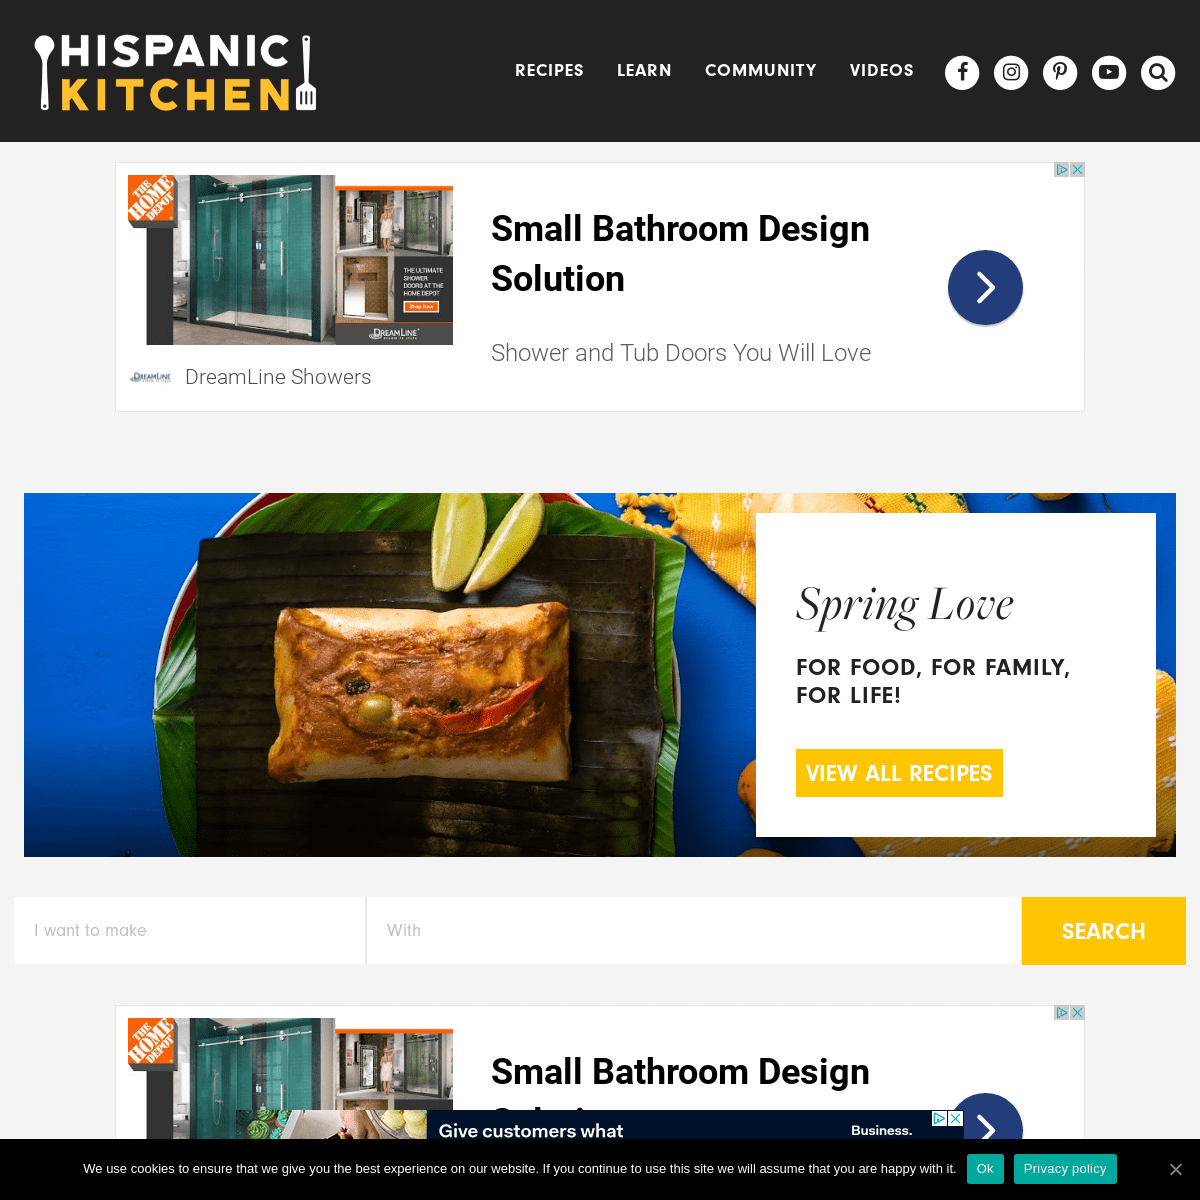 A complete backup of https://hispanickitchen.com